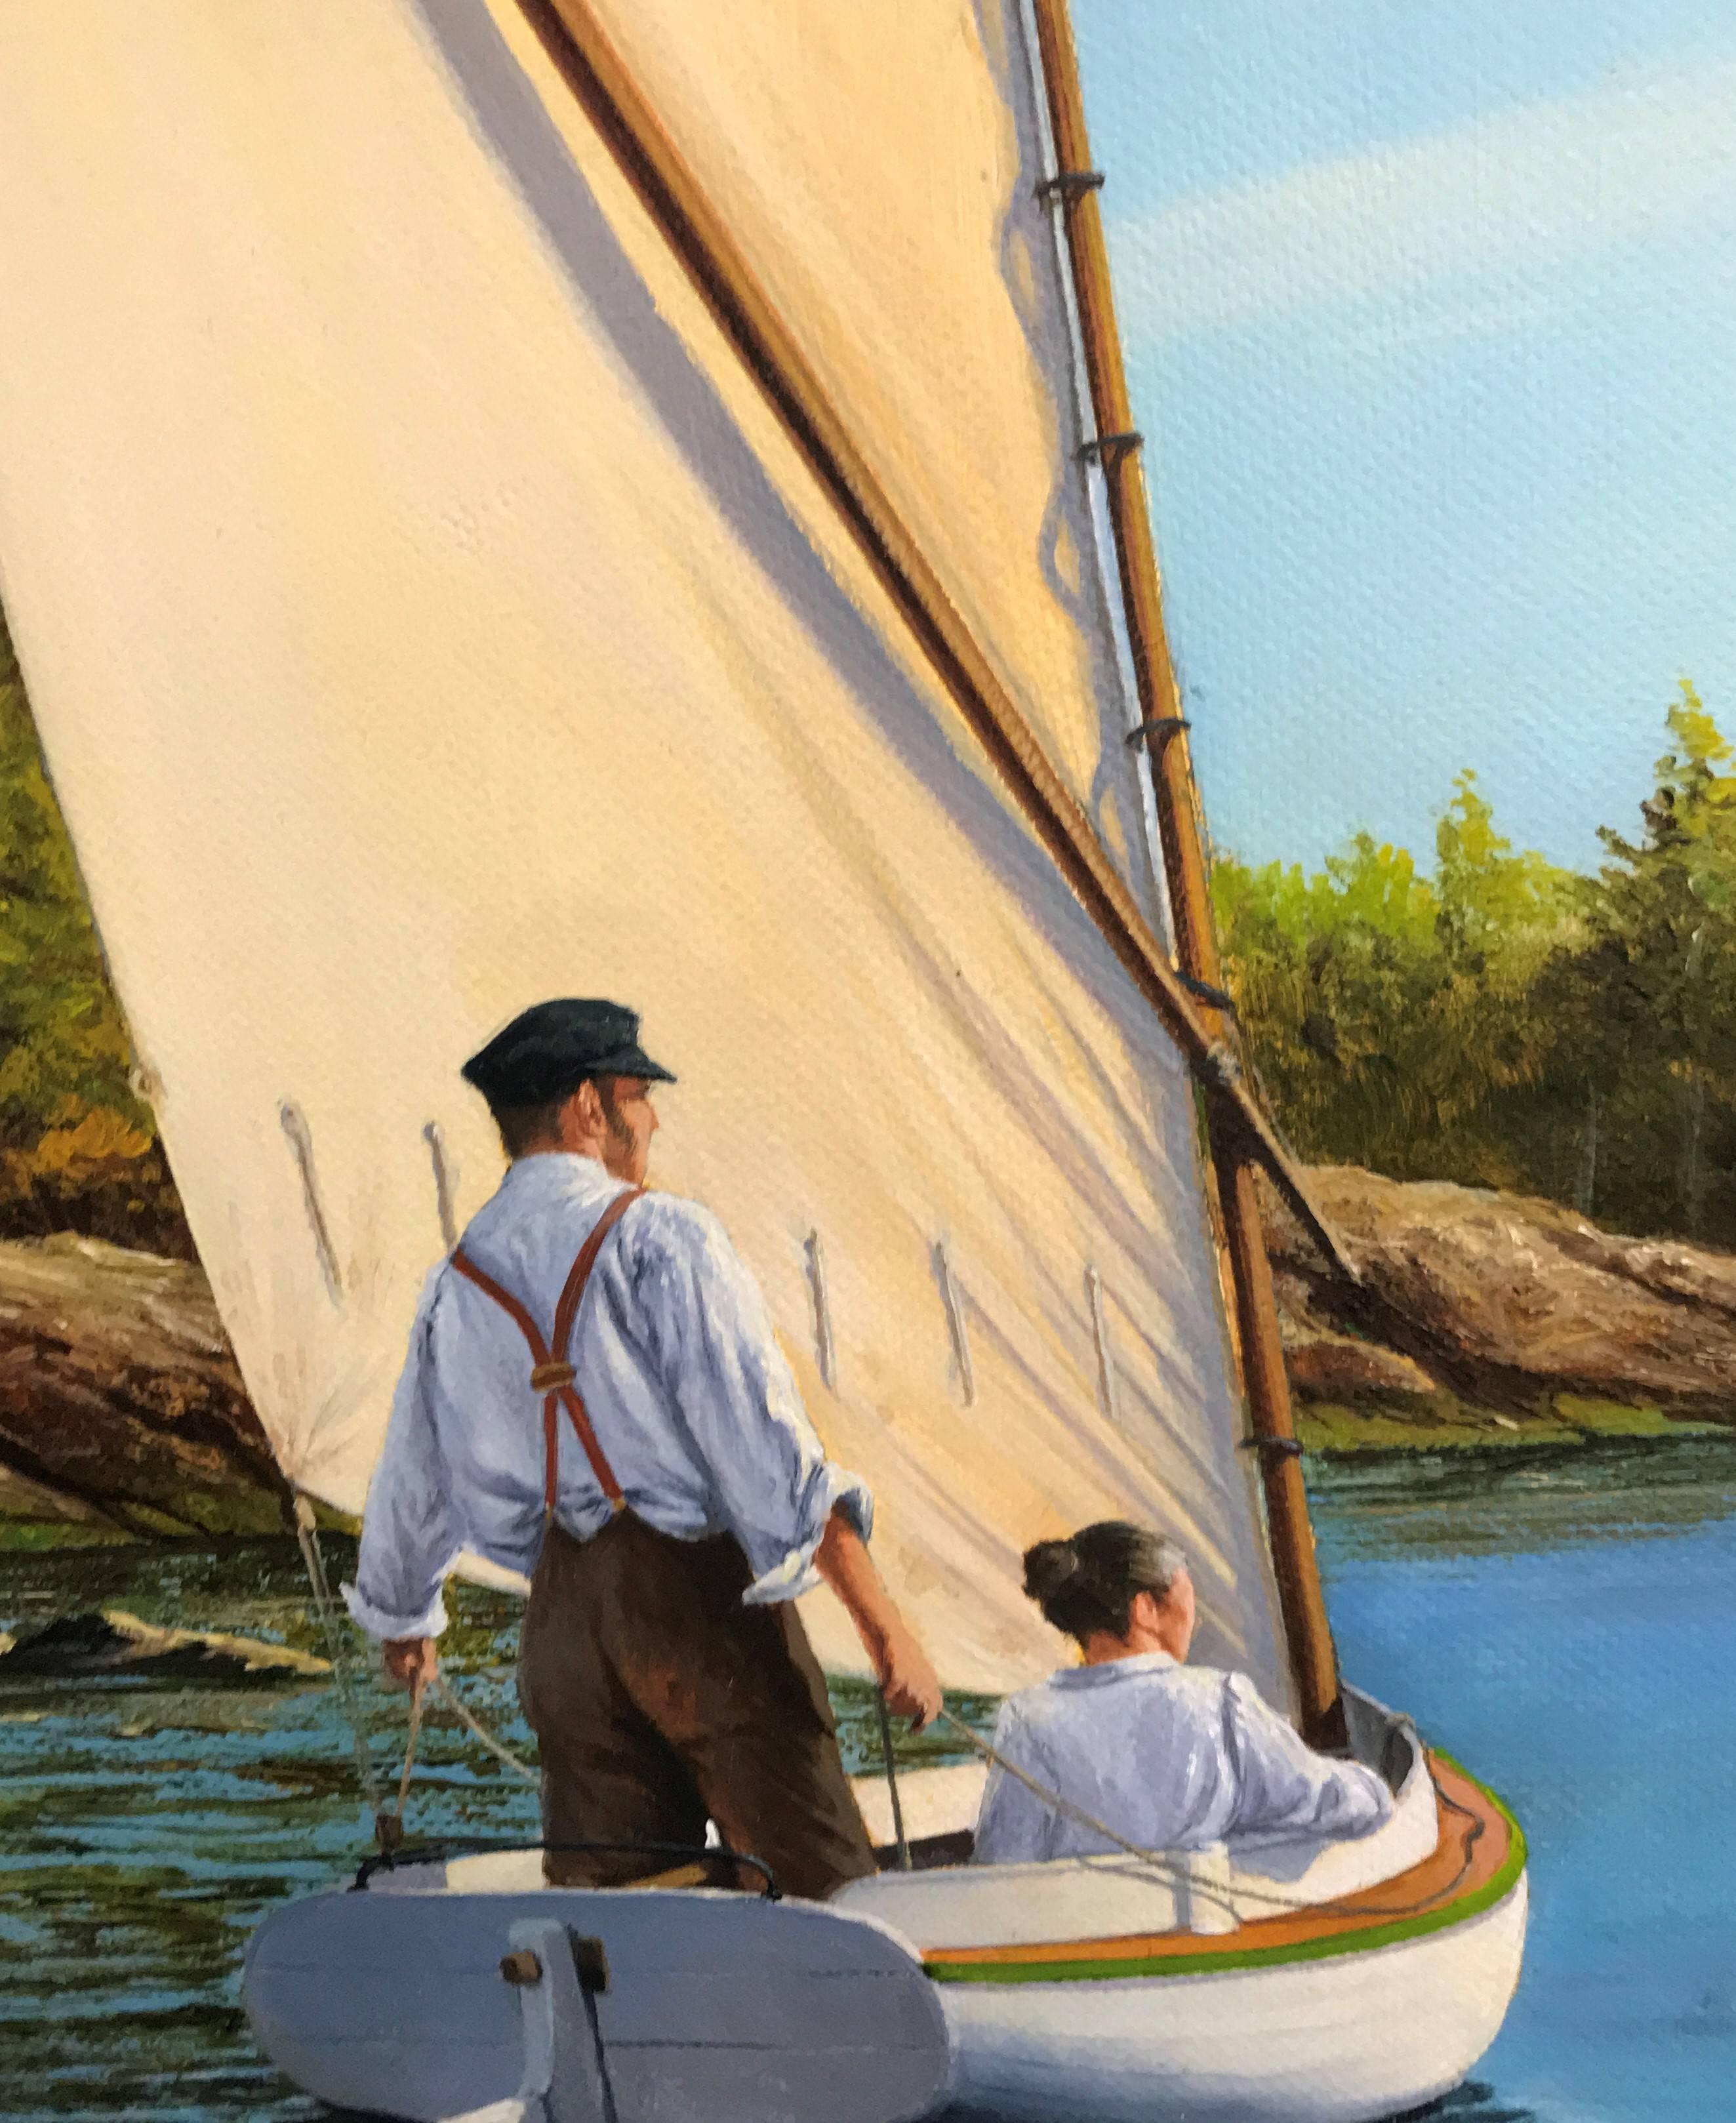 Sailing the River in the Late Afternoon Light - Painting by Andrew S. Walton